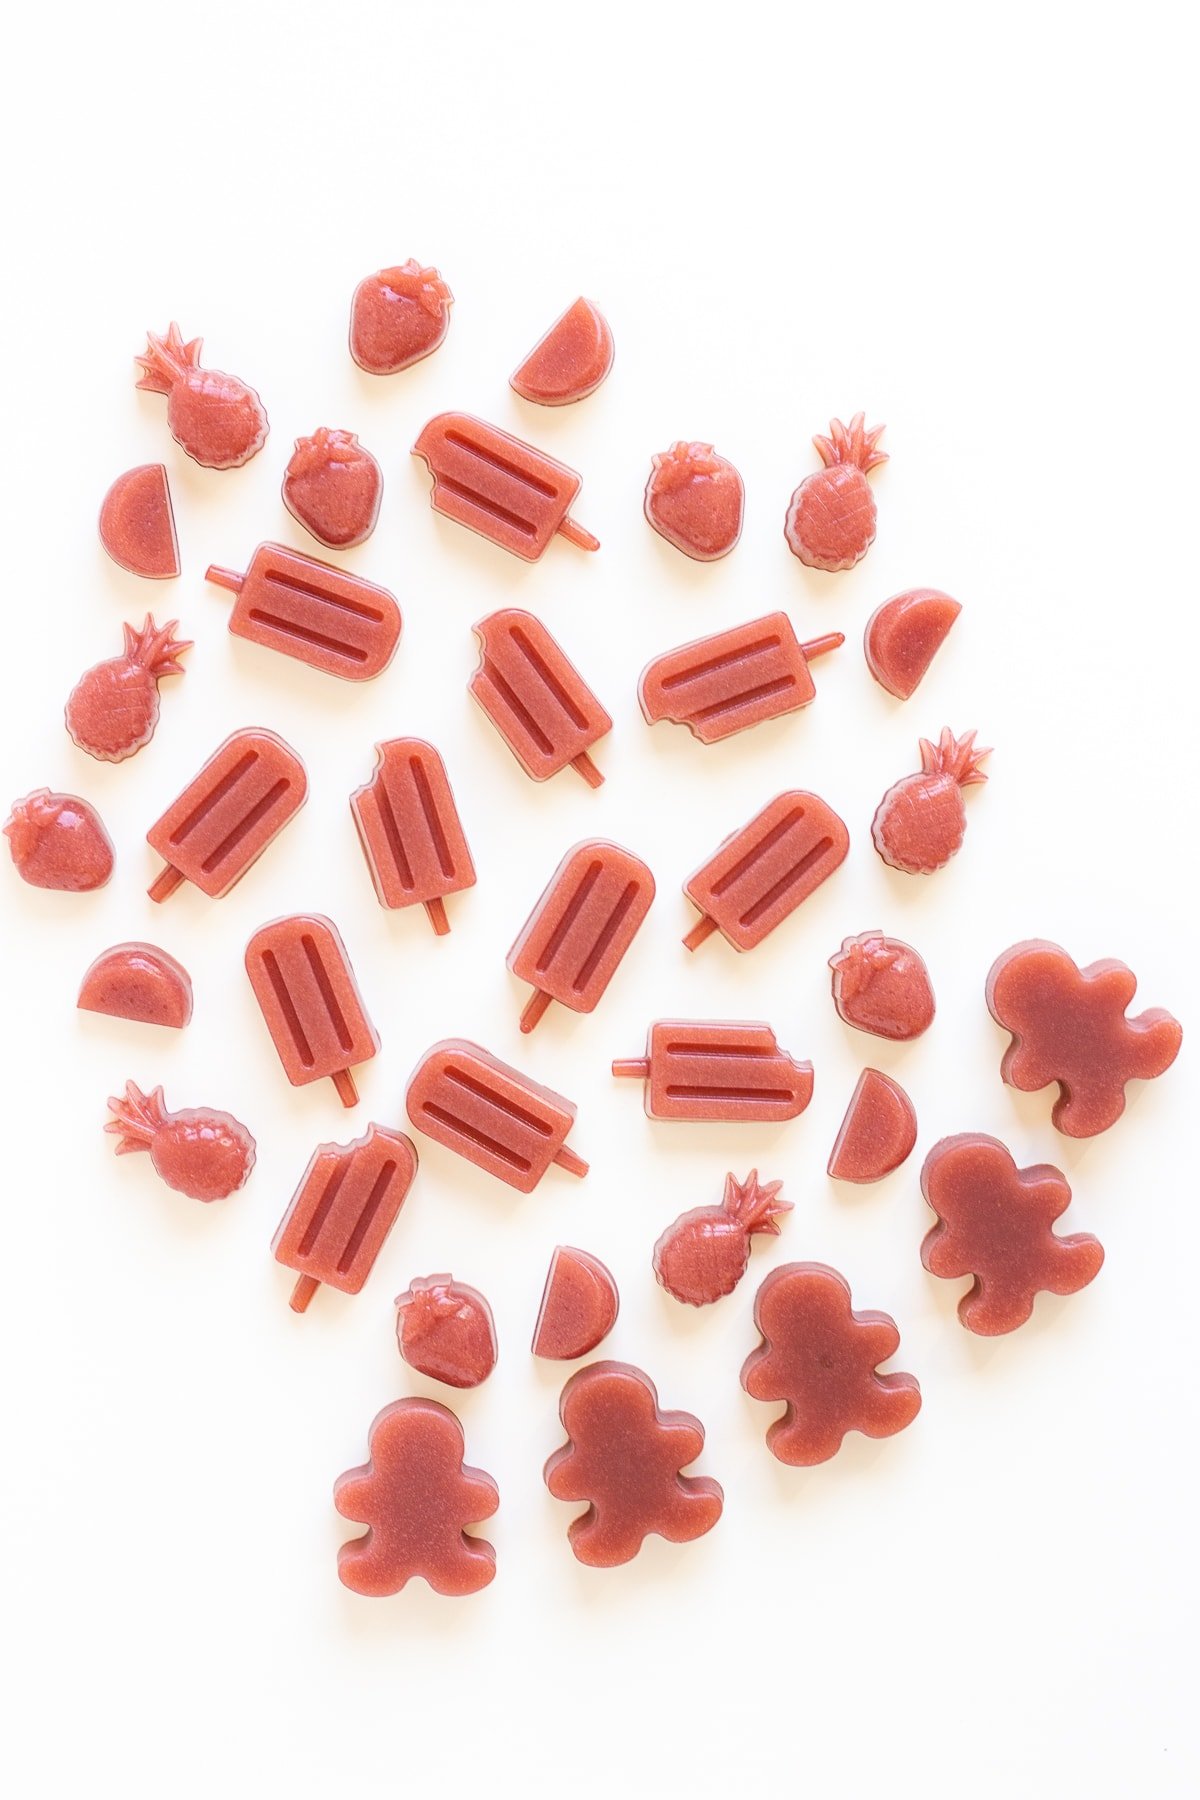 Different shapes of homemade strawberry gummies scattered on a white background